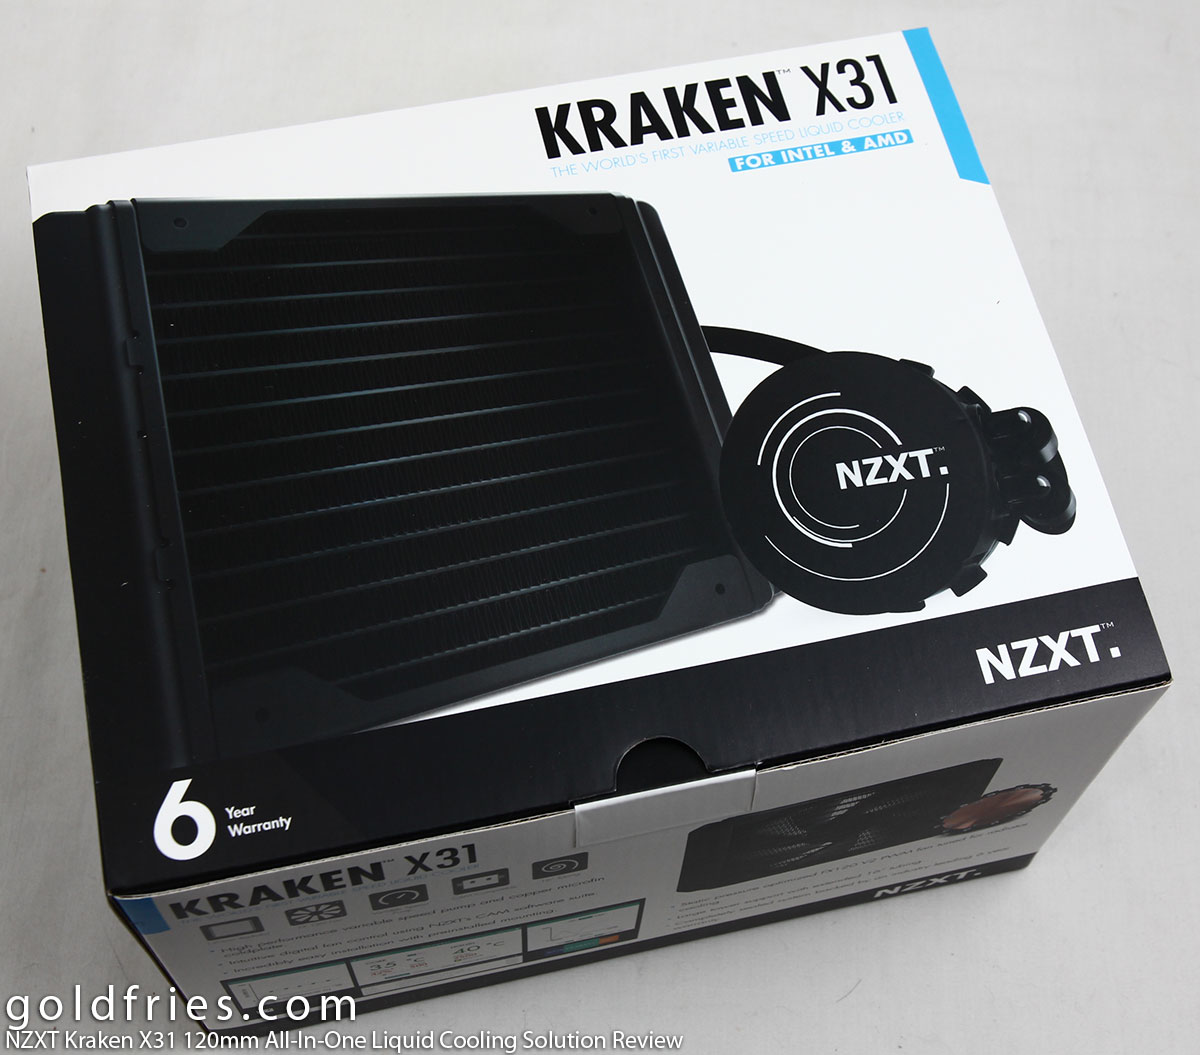 NZXT Kraken X31 120mm All-In-One Liquid Cooling Solution Review